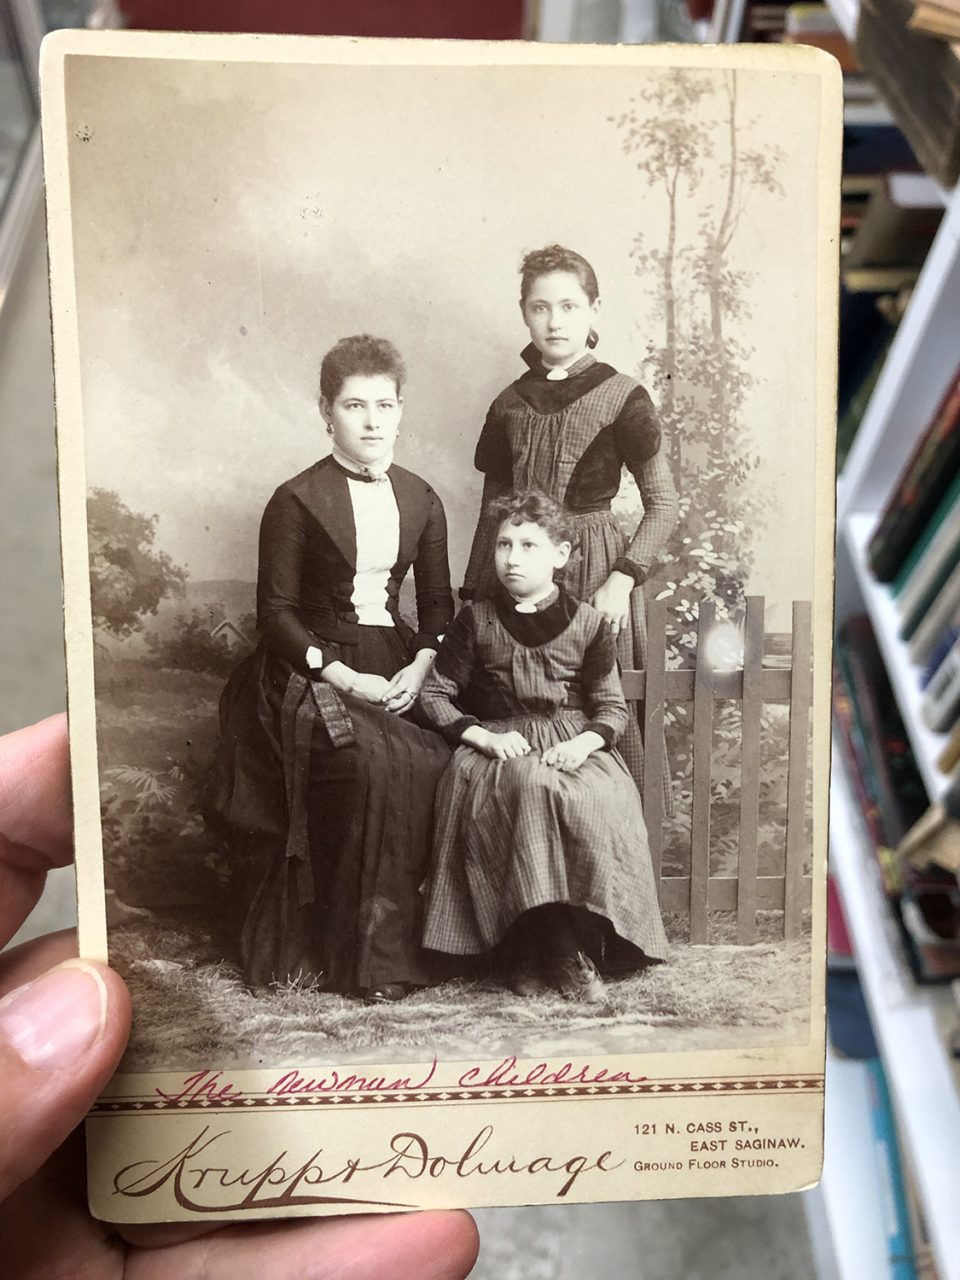 Cabinet card portrait of the Newman children made by the photography studio of Krupp & Dolmage in East Saginaw, probably circa 1890.